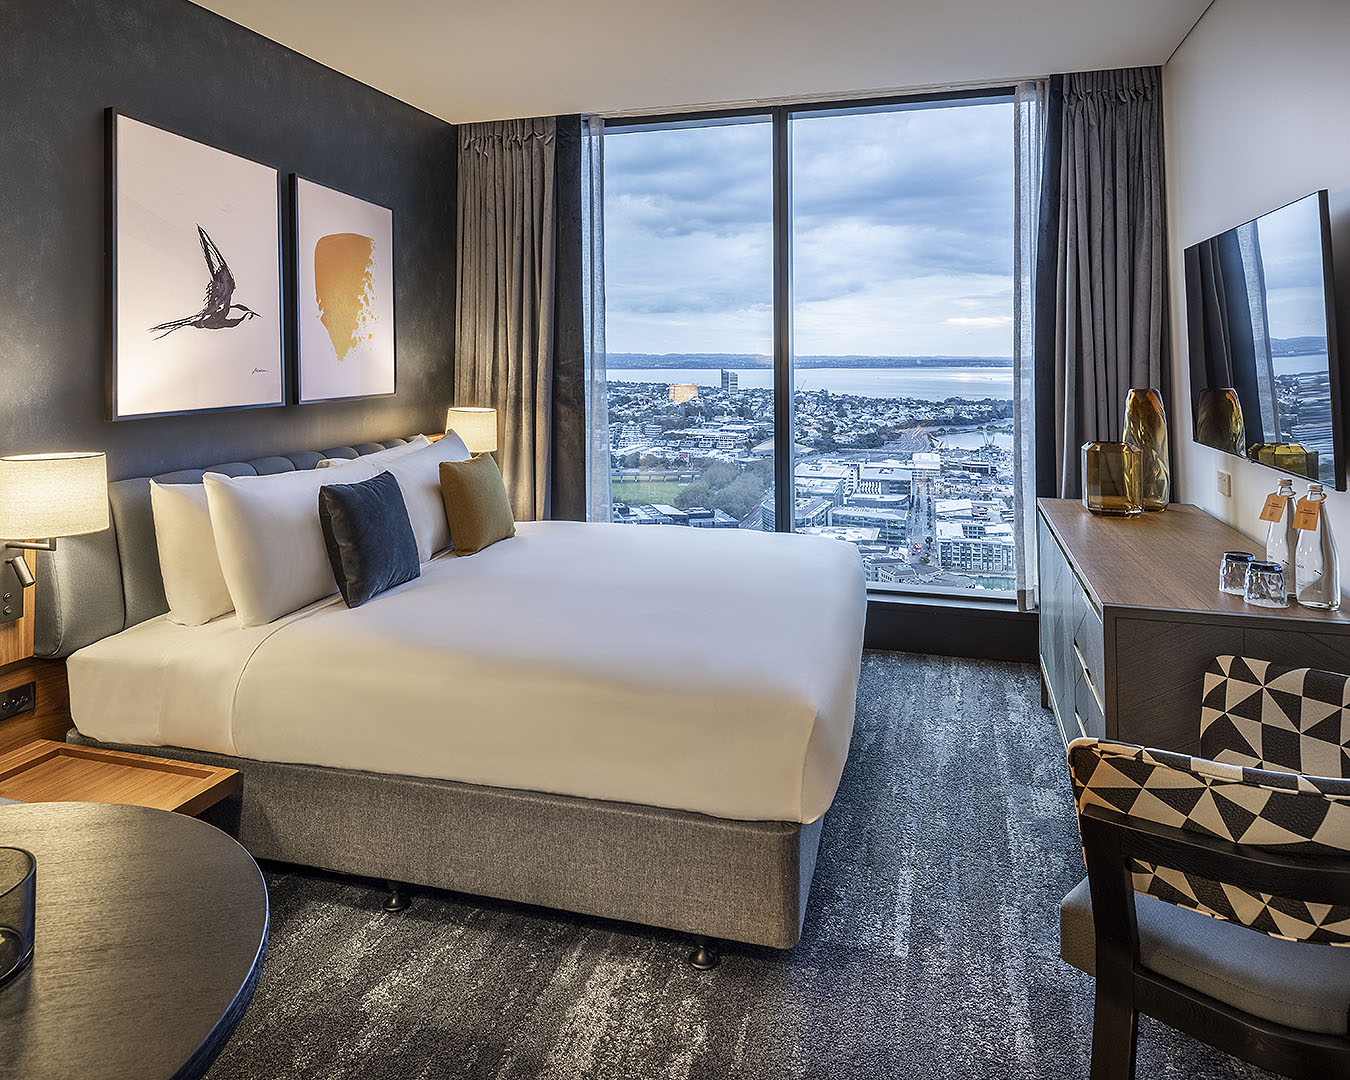 A room at the voco auckland city centre hotel, one of the best hotels in auckland.